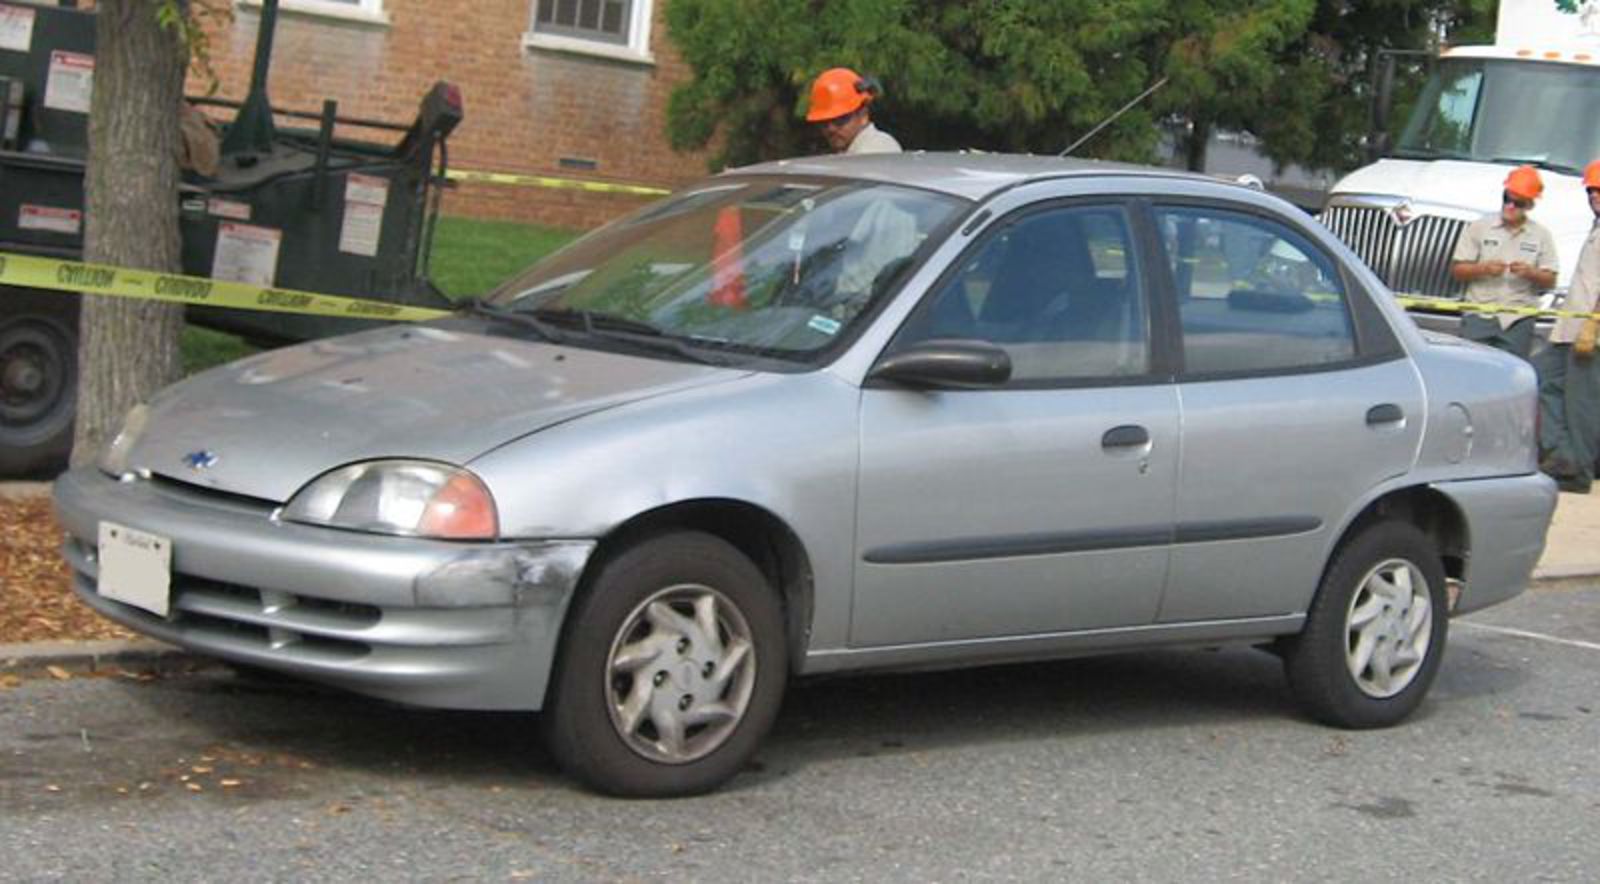 Do you want to learn more about the 2000 Geo Metro?